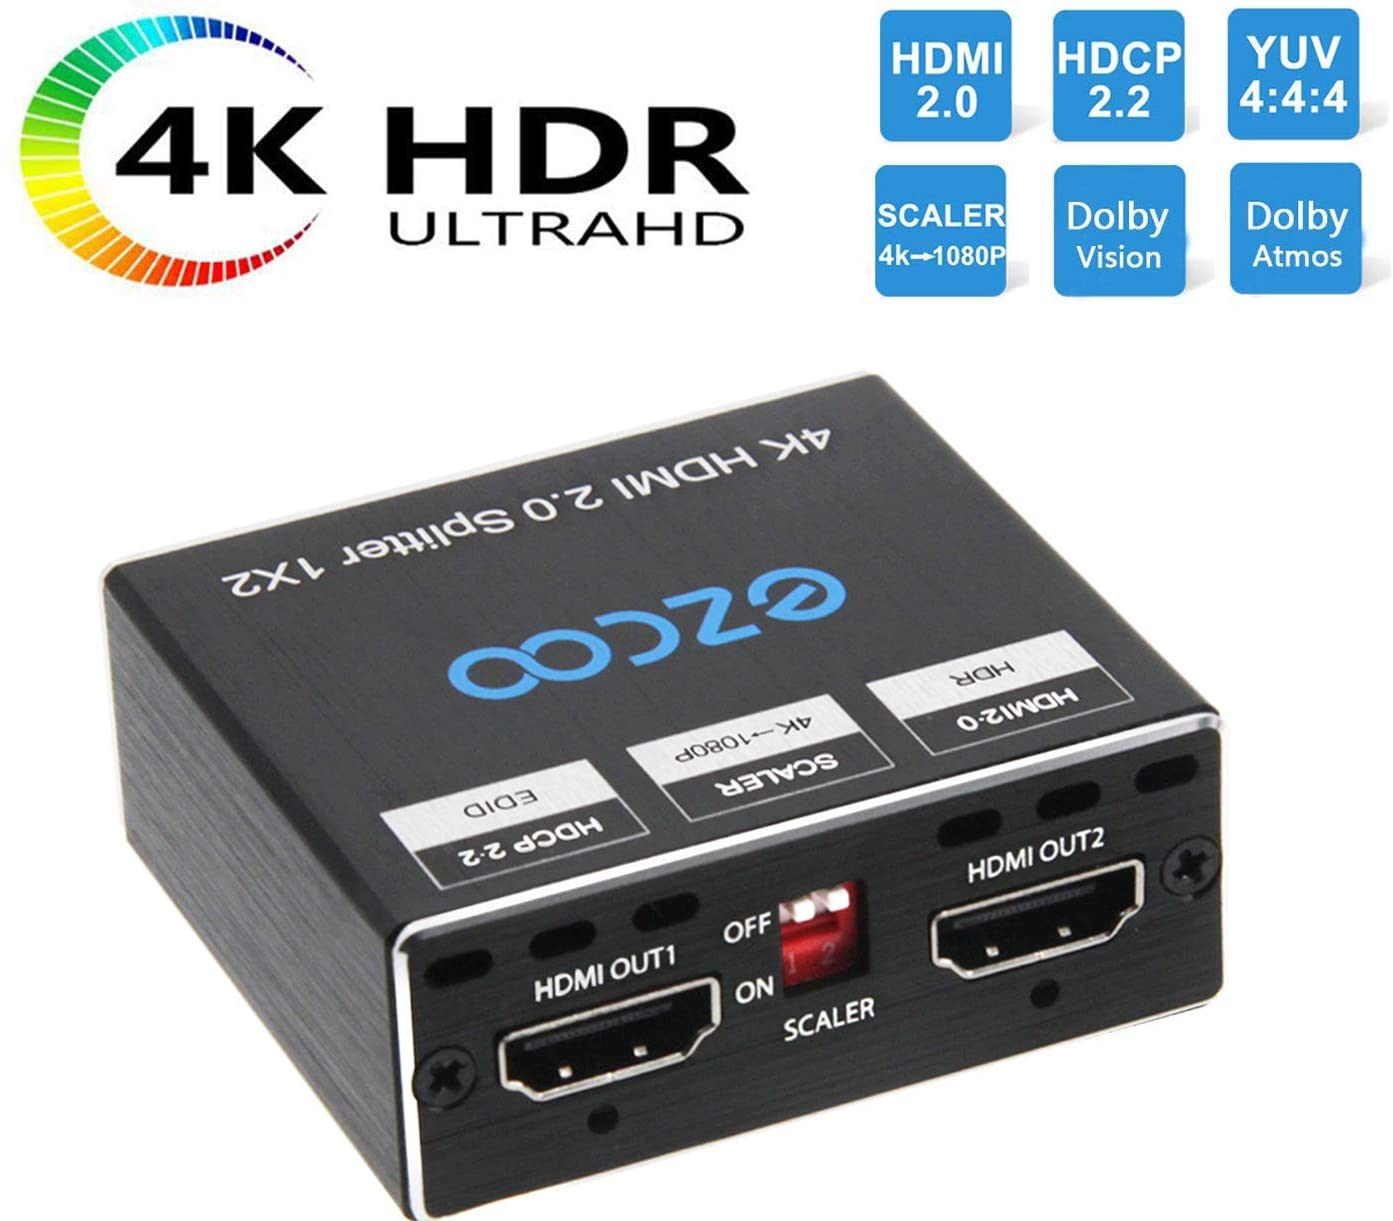 Scaler 4K 1080P HDMI Splitter 1 in2 out 4K 60Hz 4:4:4 HDR Dolby Vision Dolby Atmos Scaler EDID Switch,USB Power Firmware Upgrade HDCP2.2